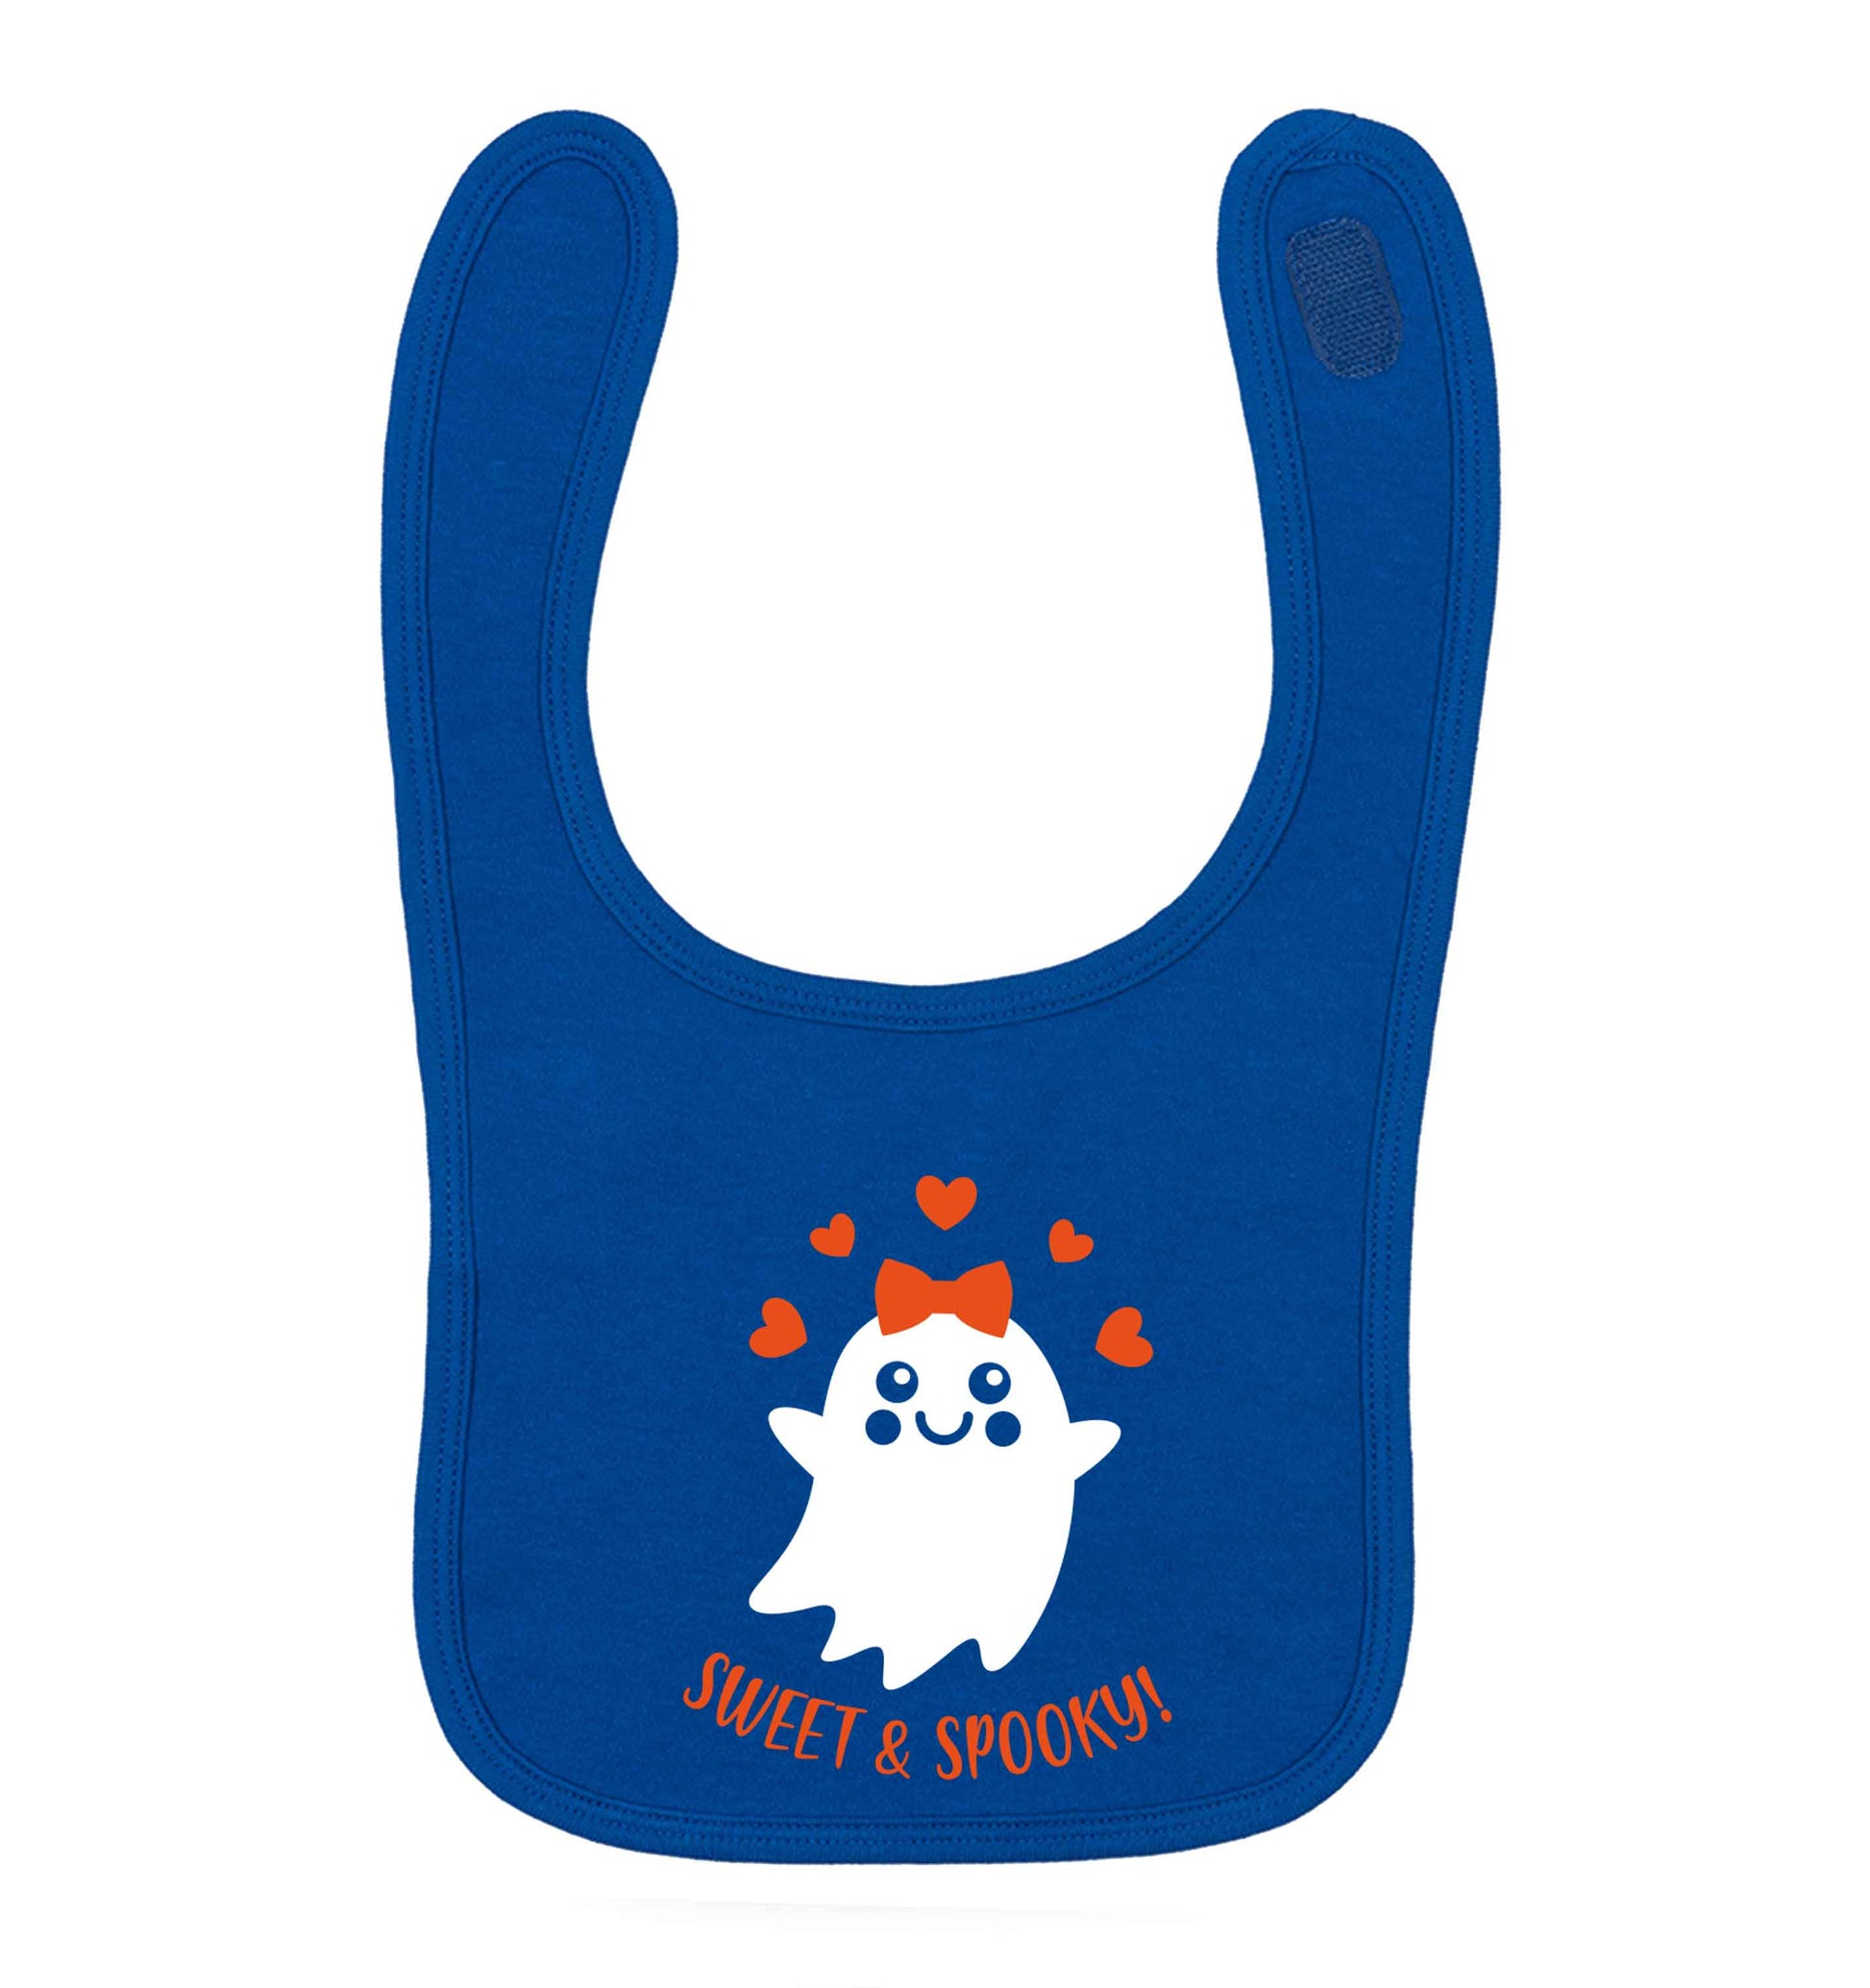 Sweet and spooky royal blue baby bib